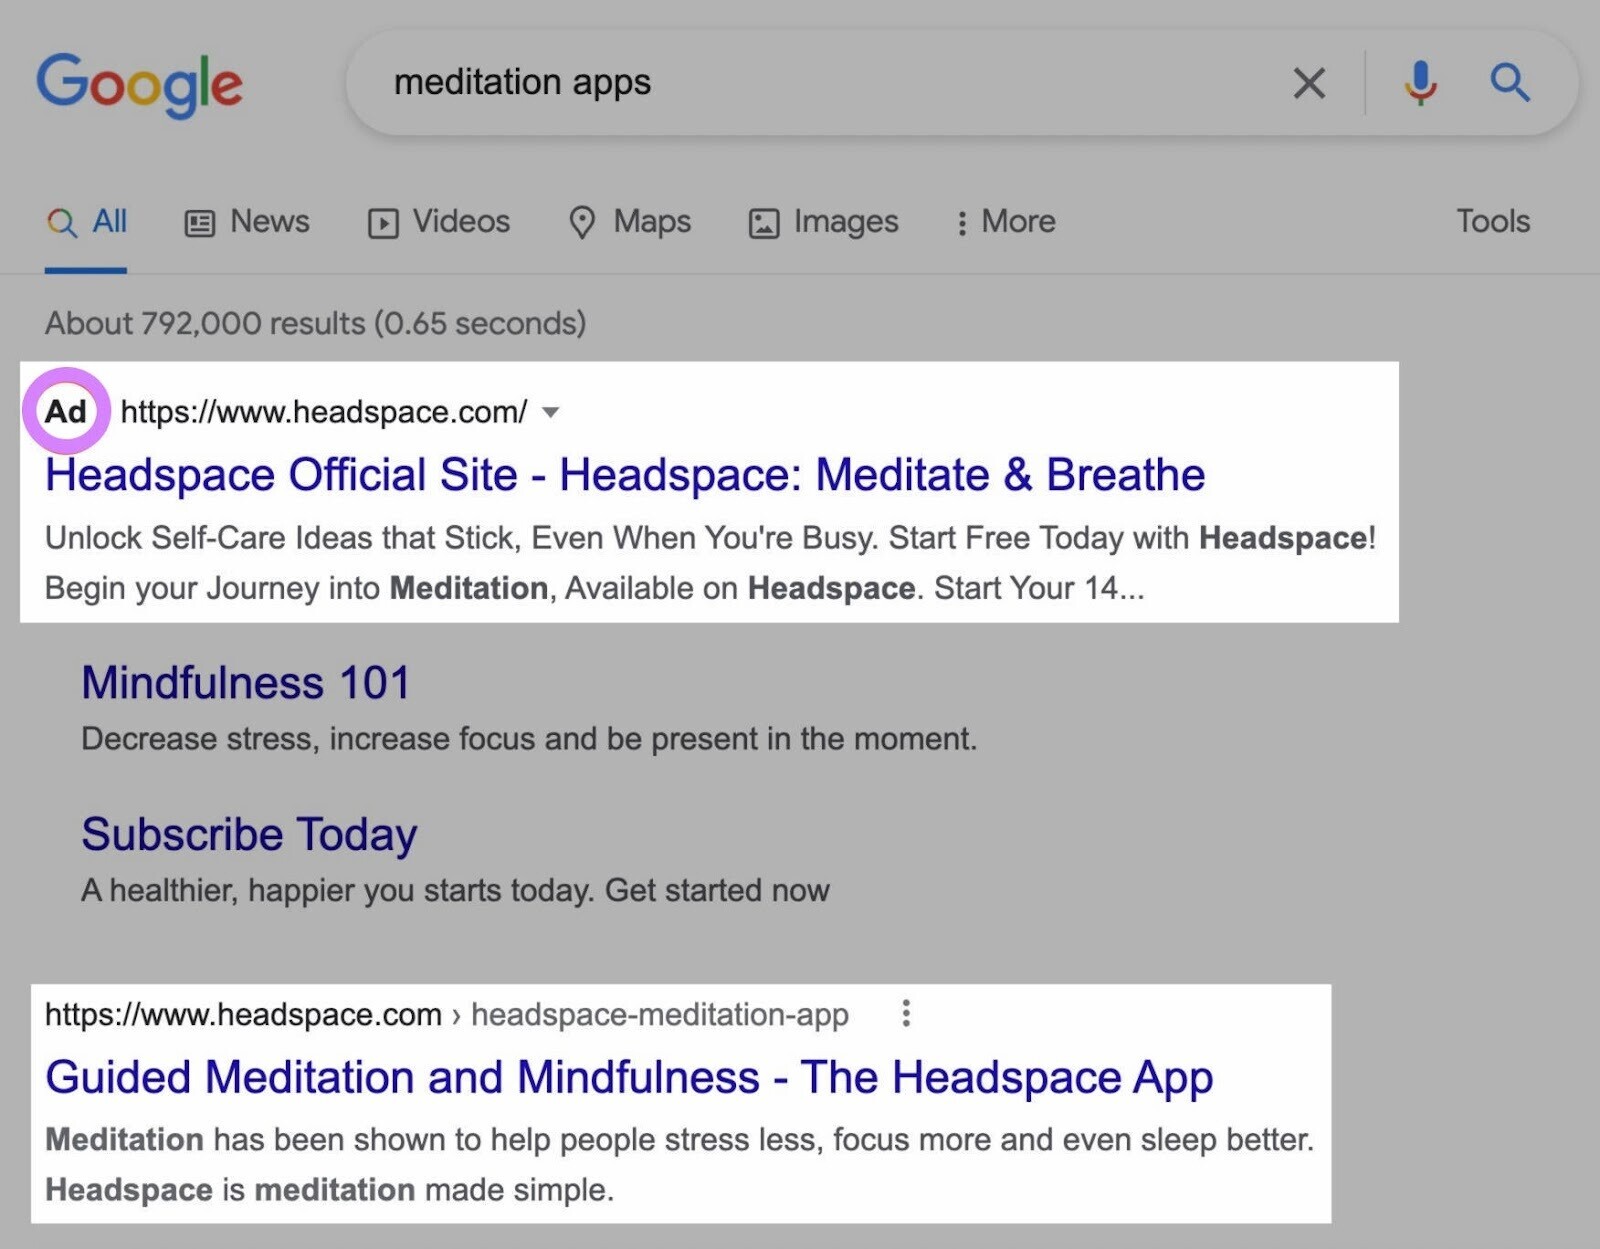 Google SERP shows both paid and organic results for “meditation apps” search